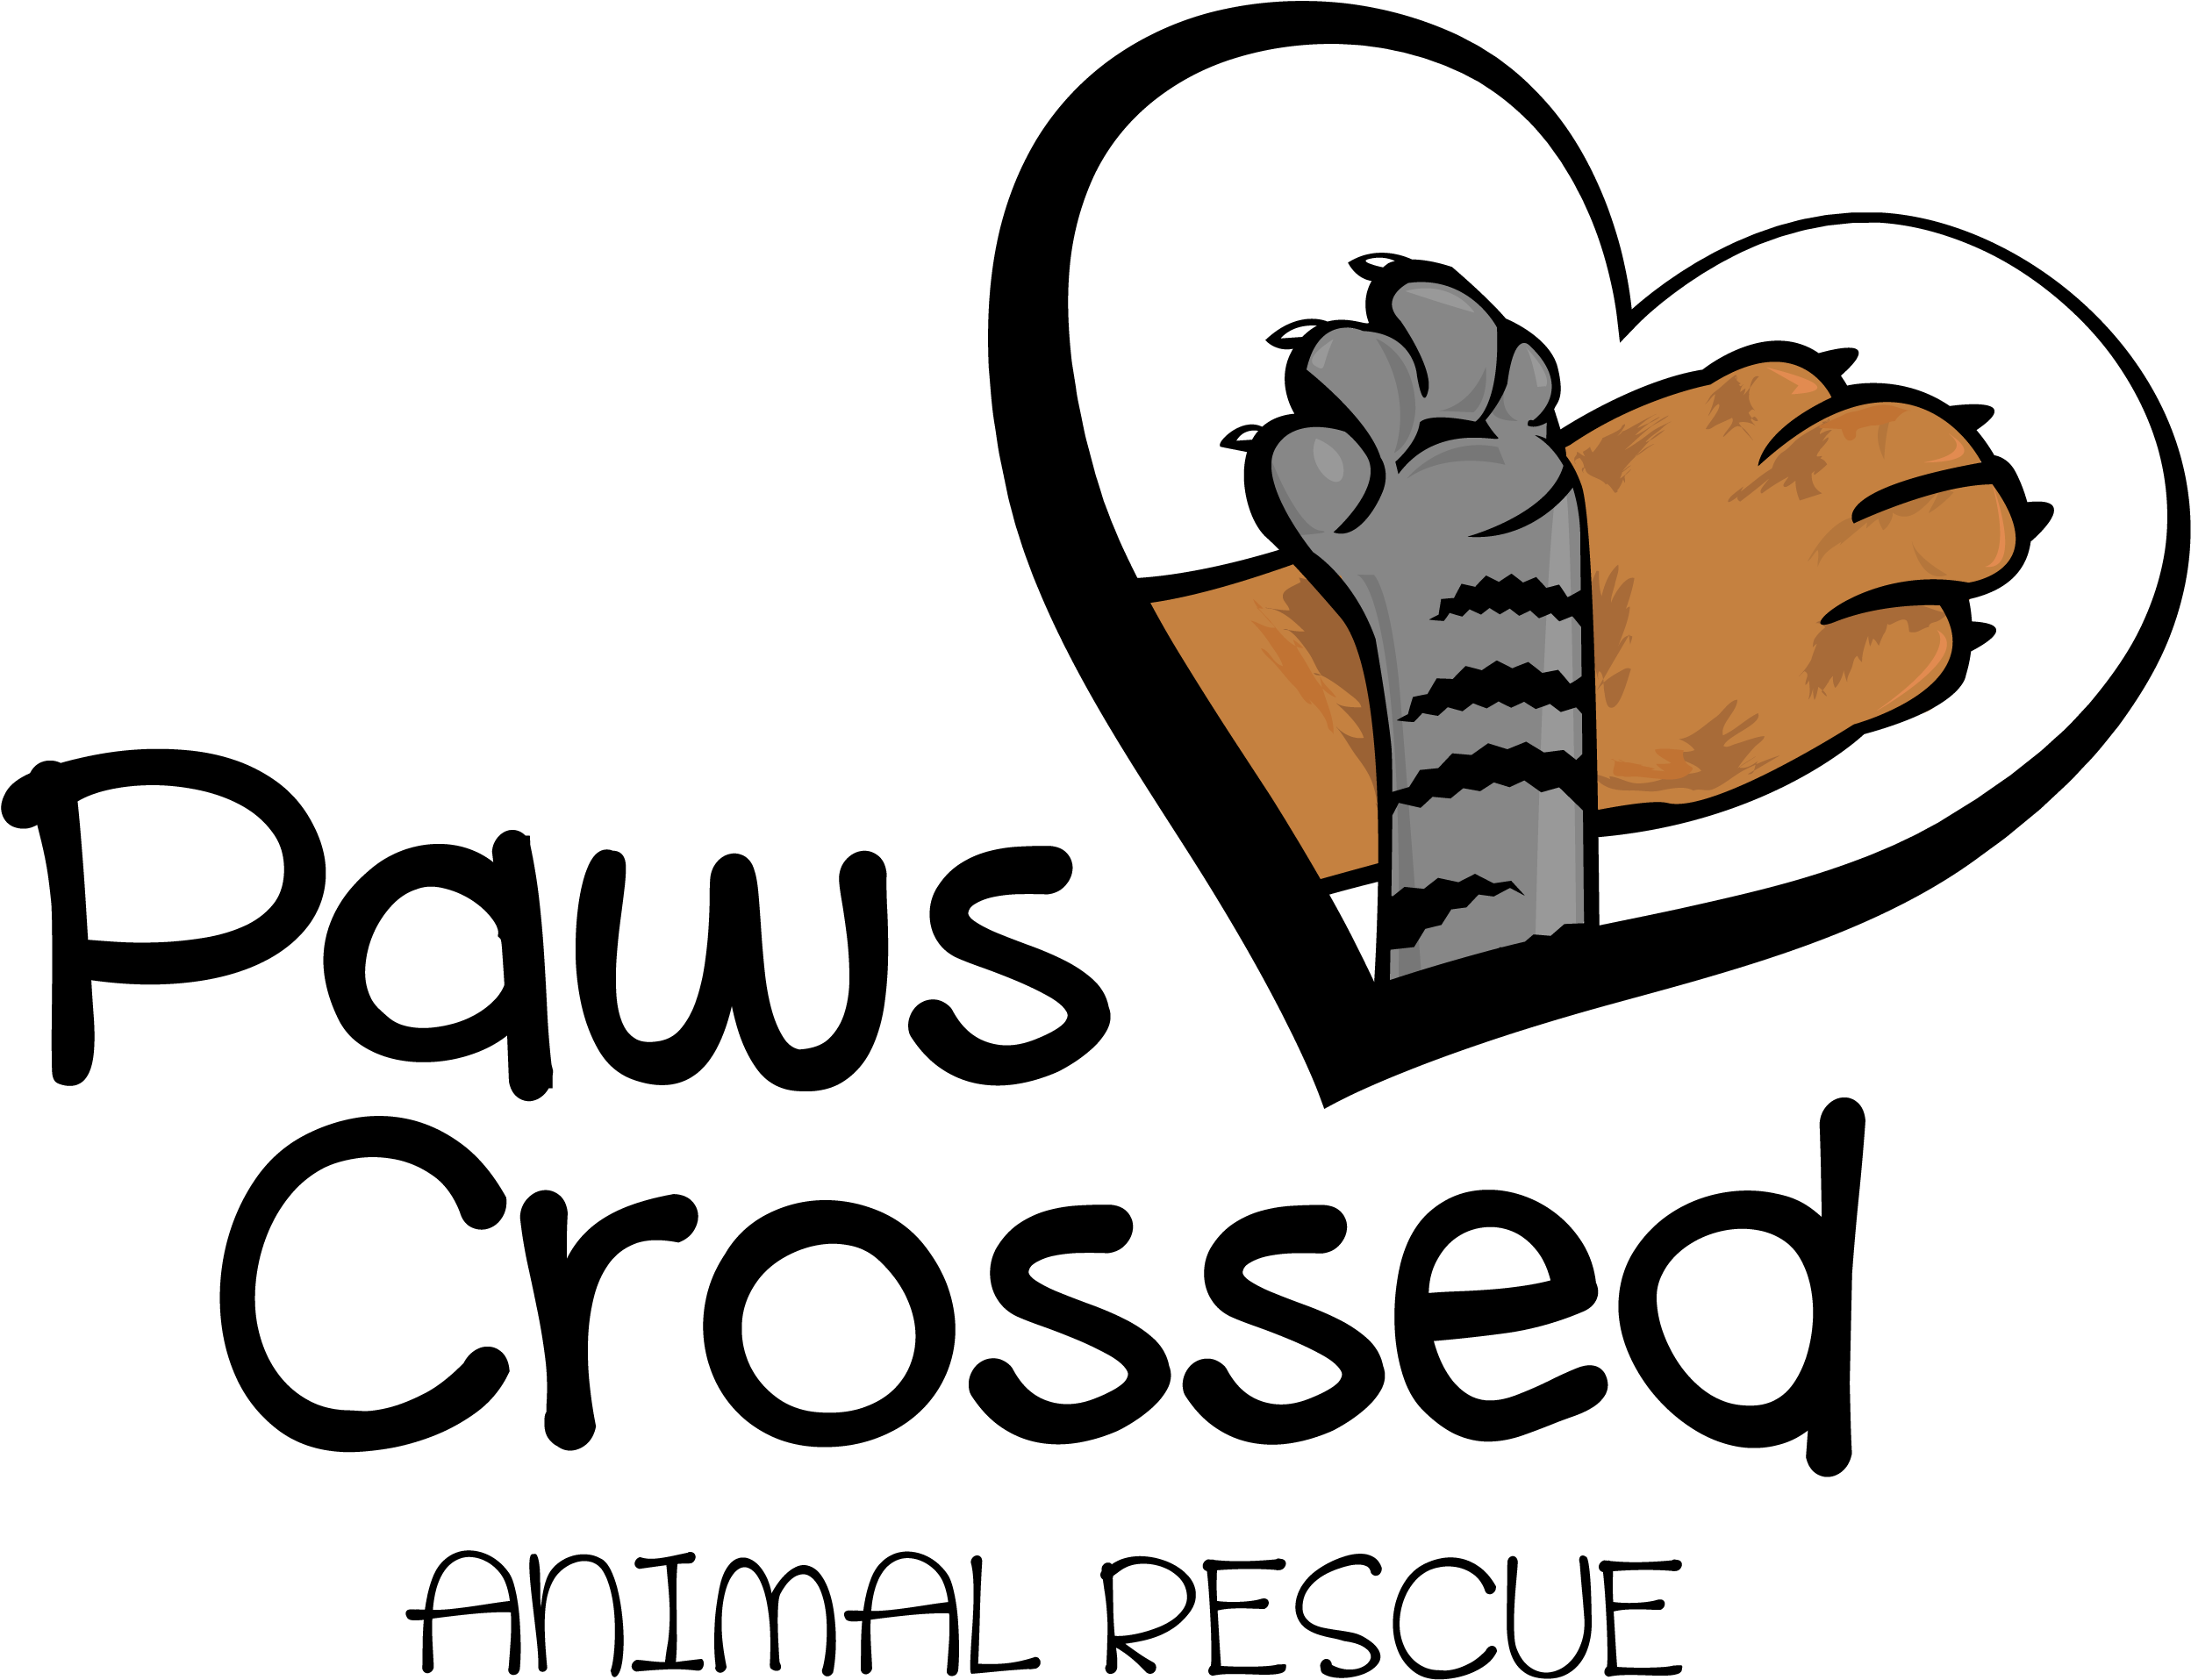 Paws Inc. Cat Crossed Paws. Animal Shelter logo. Donate for the protect animals.